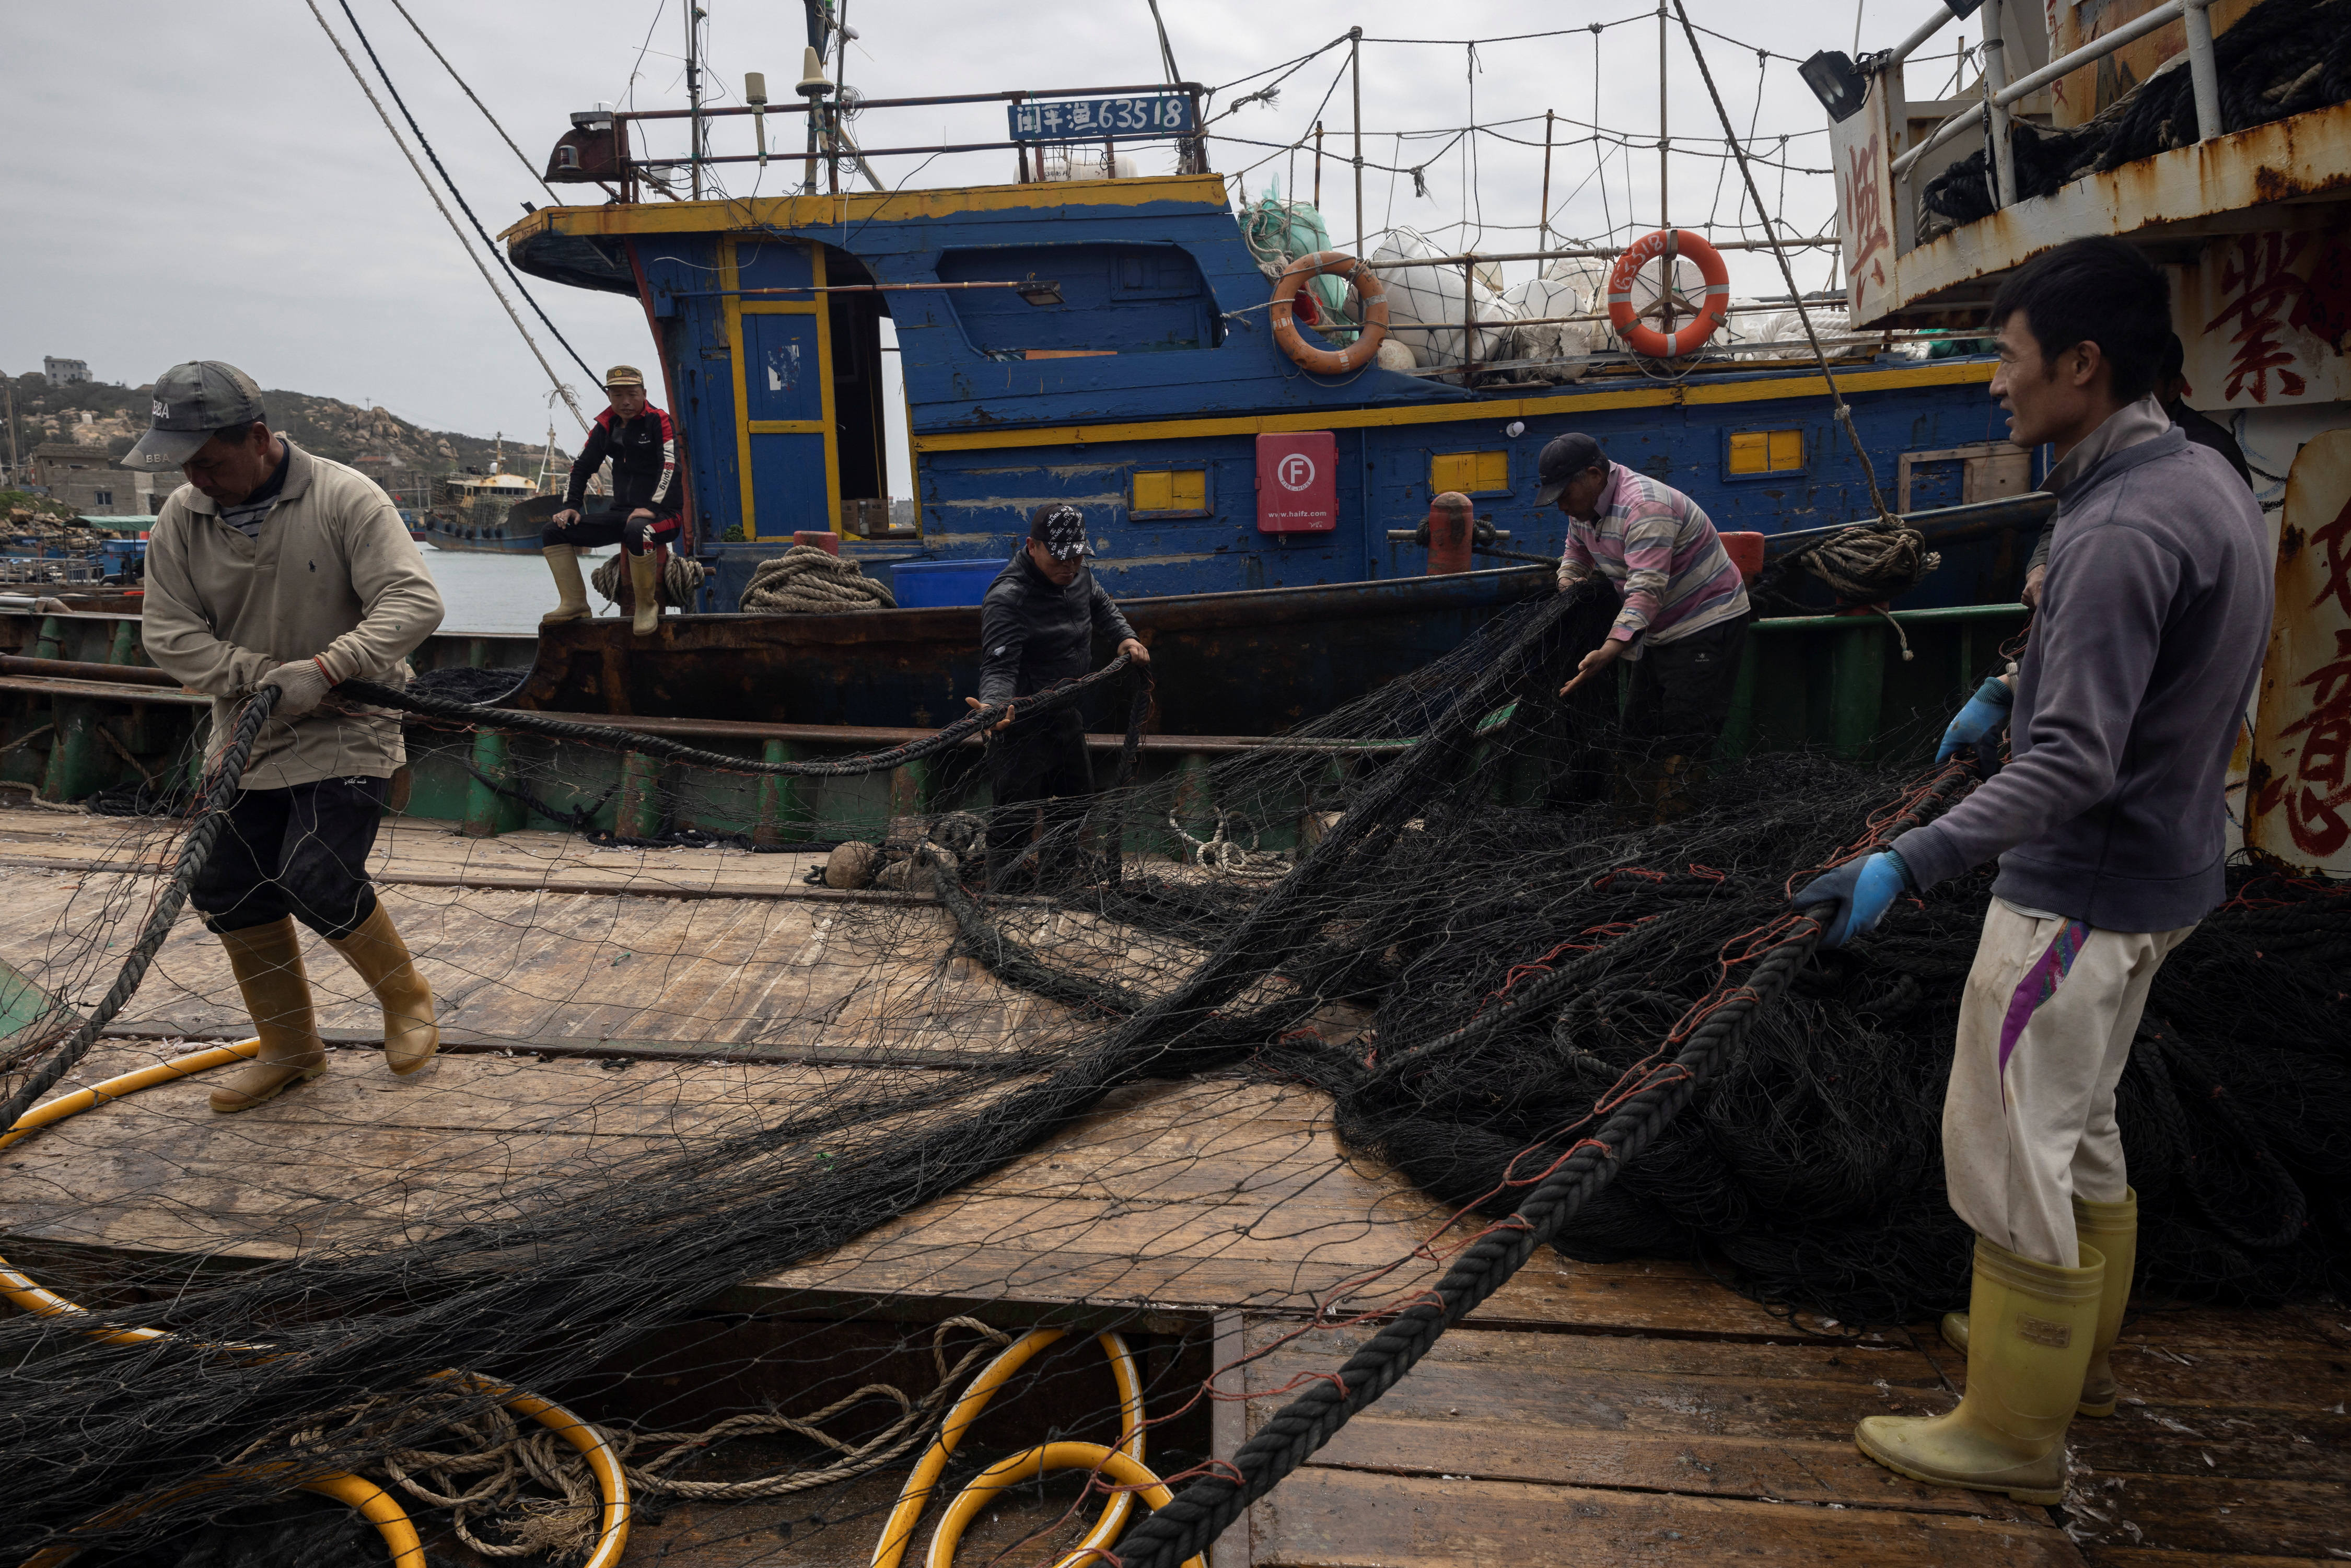 China ratifies WTO deal on fisheries subsidies